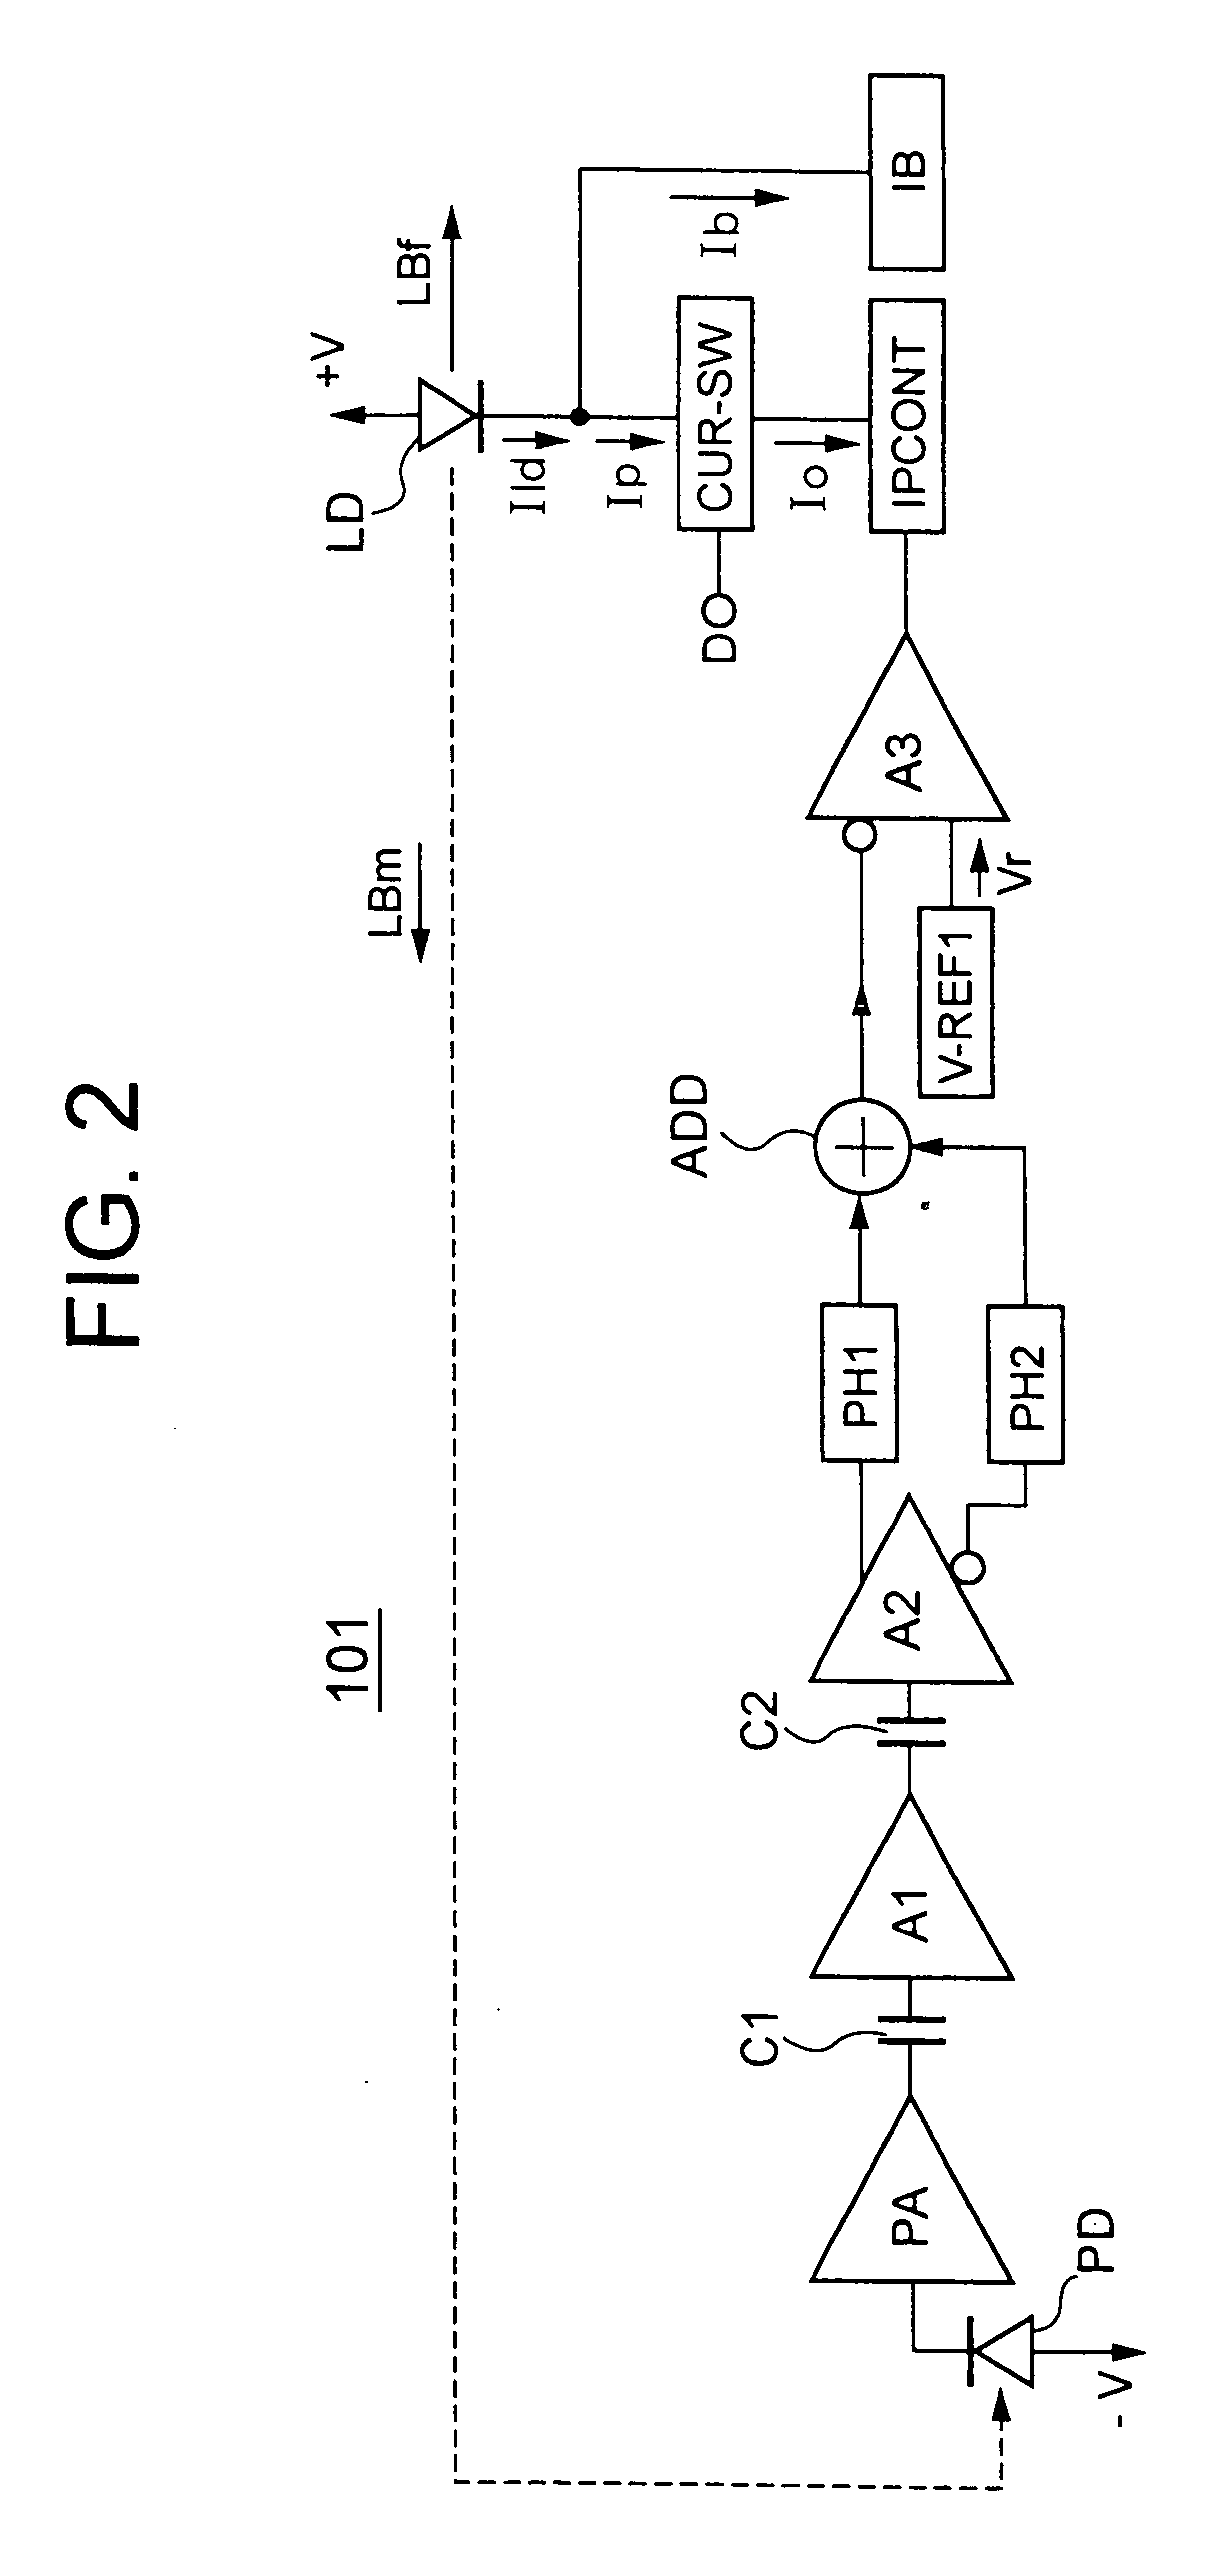 Driving apparatus of a light-emitting device